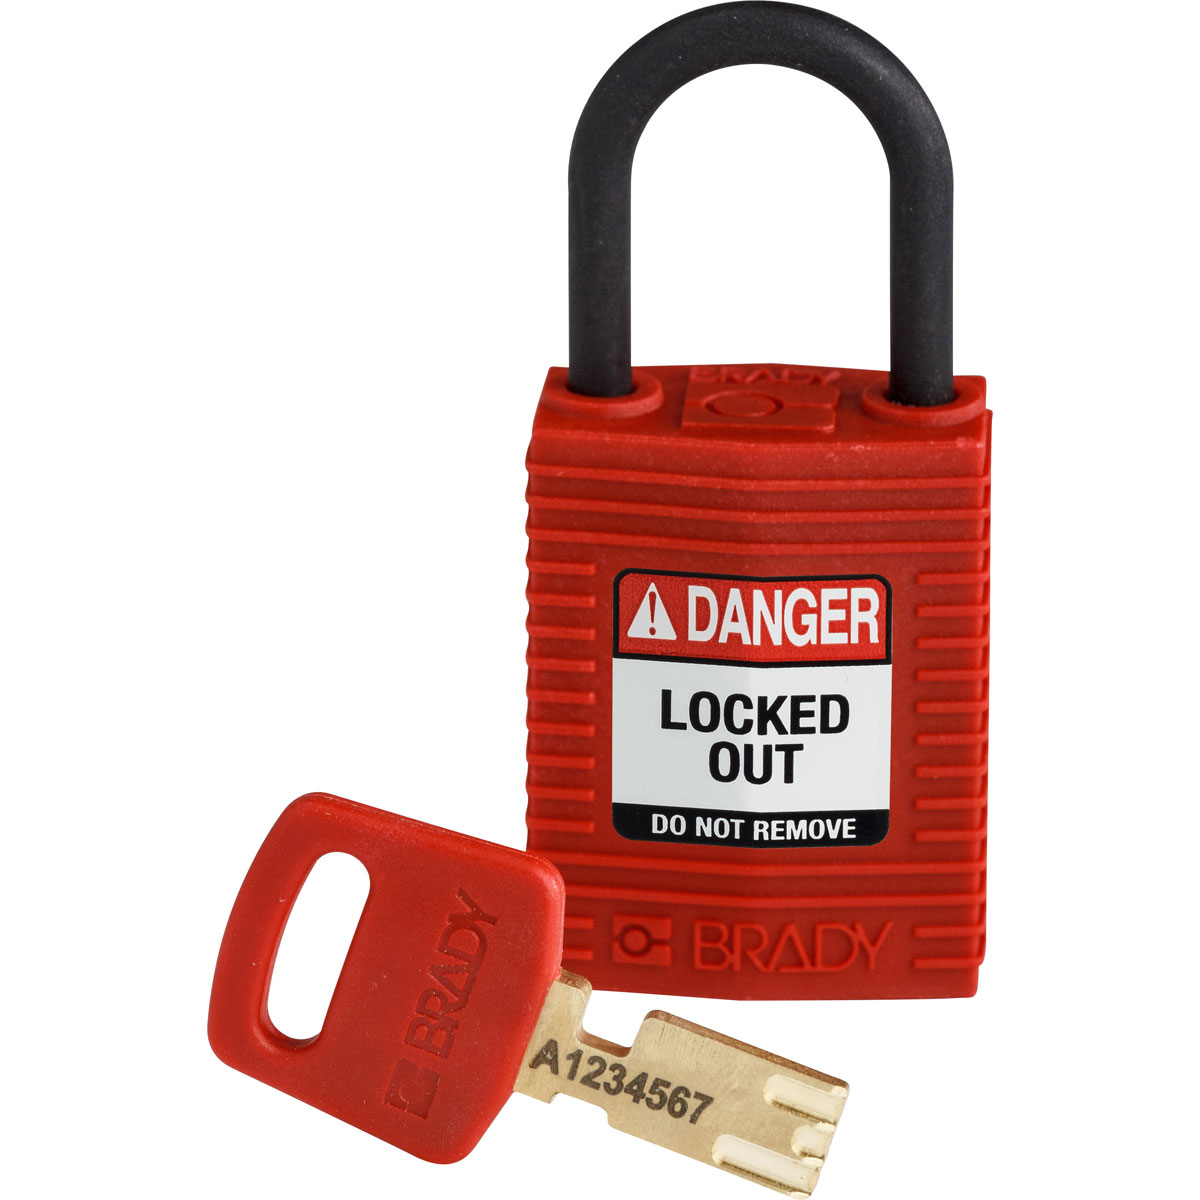 Details about   Box of 12 Brady 150180 SafeKey Compact Nylon Lockout Padlocks CPT-RED-25PL-KD 